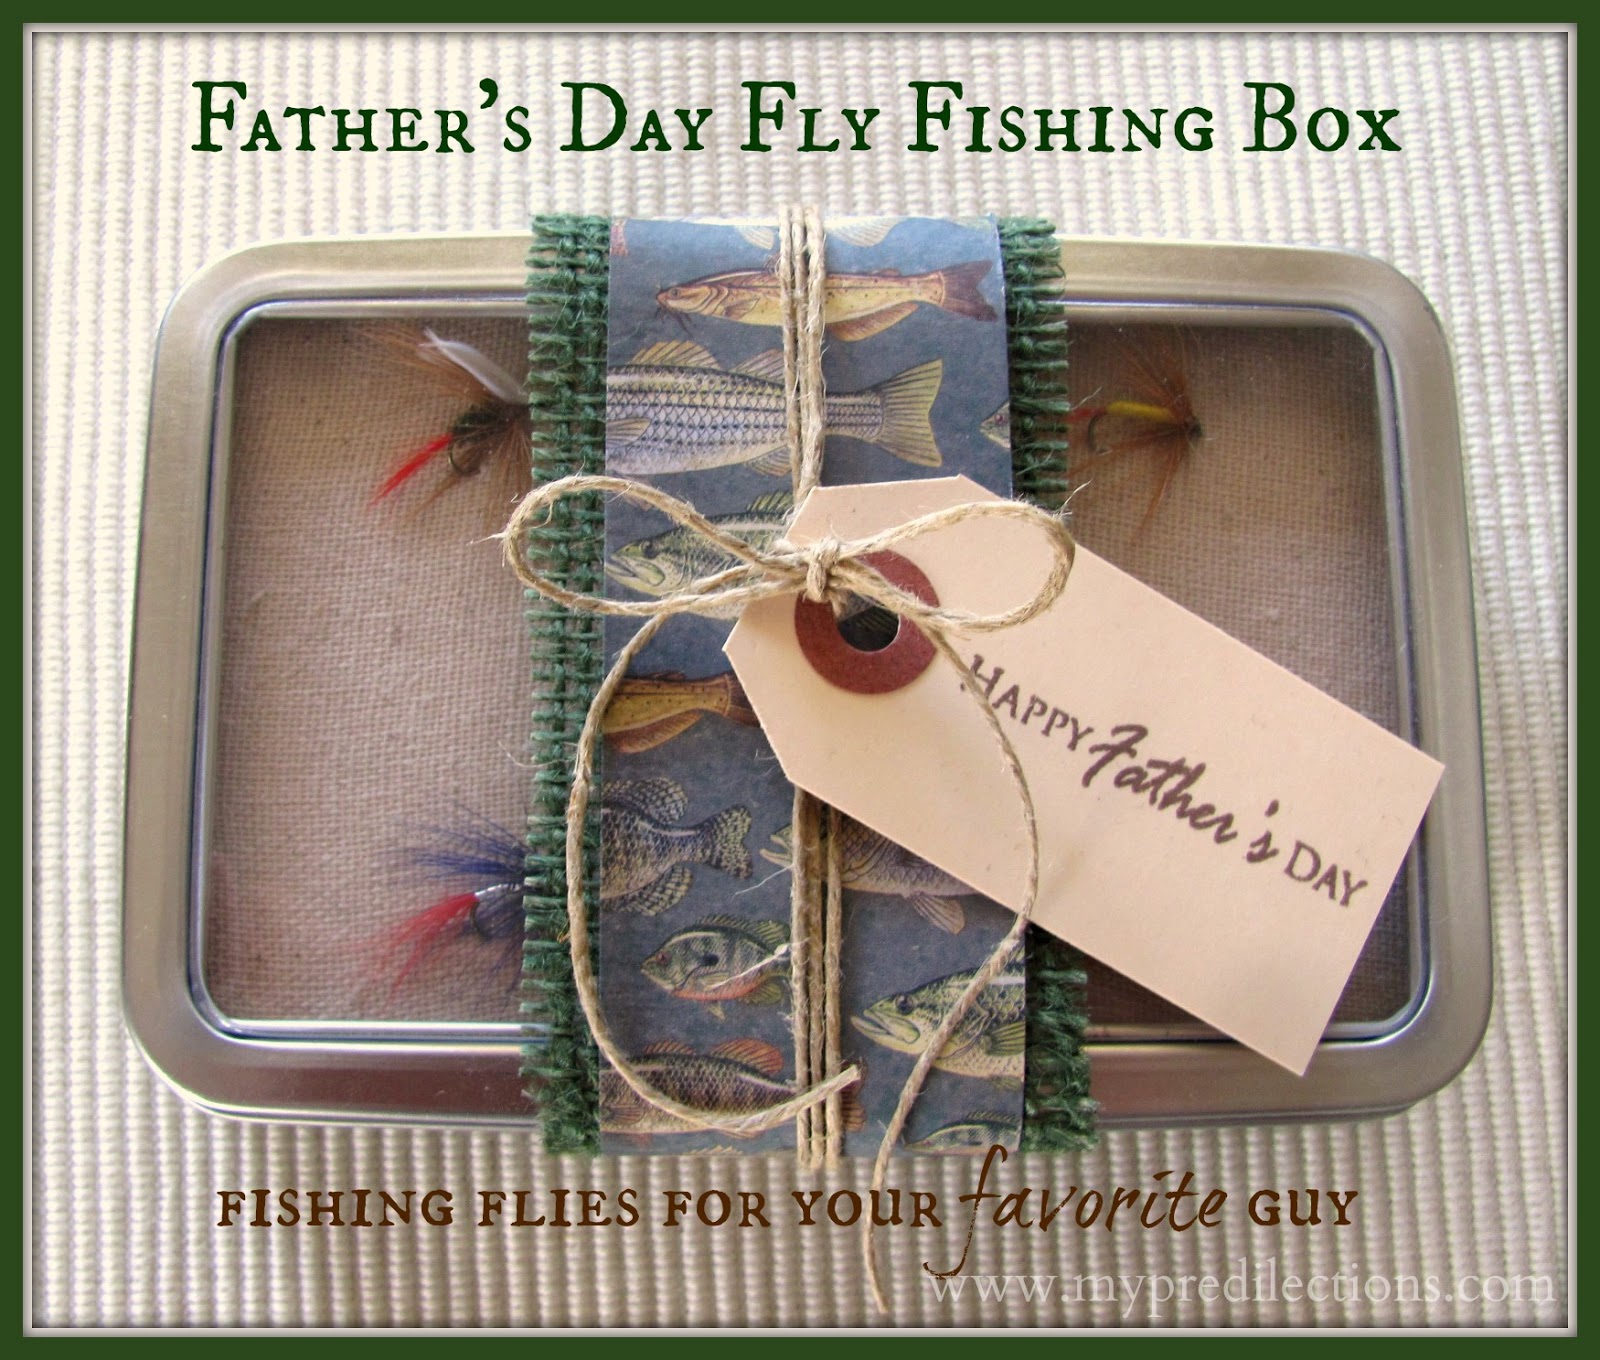 Father's Day Gift Idea: Fly Fishing Box {#FathersDay}